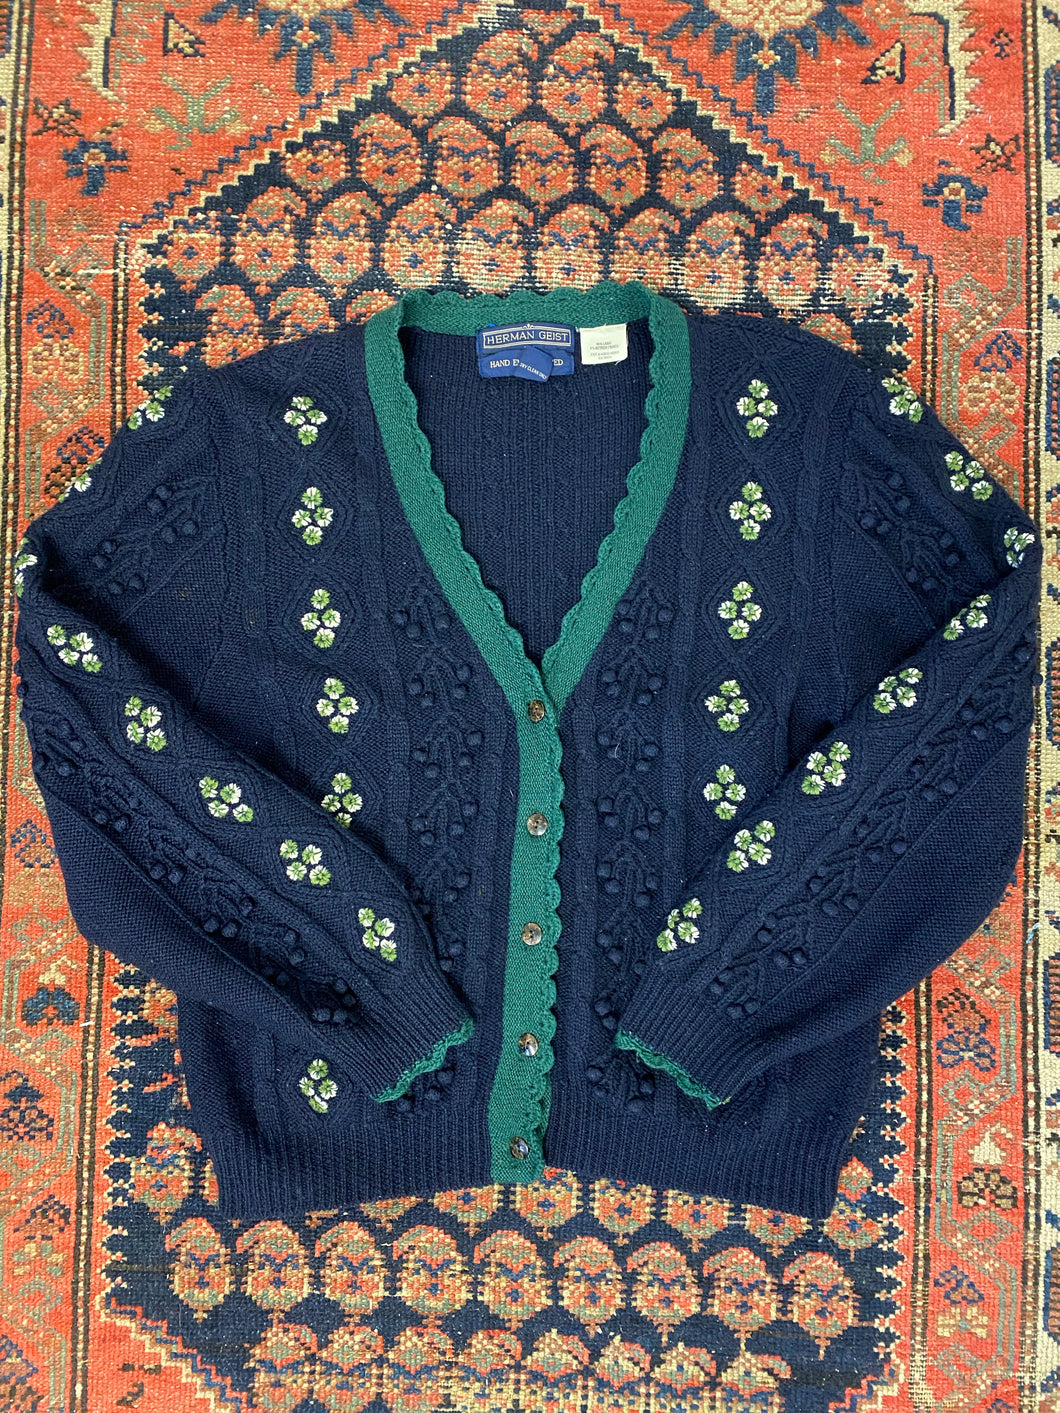 Vintage Knitted Cardigan Sweater - S